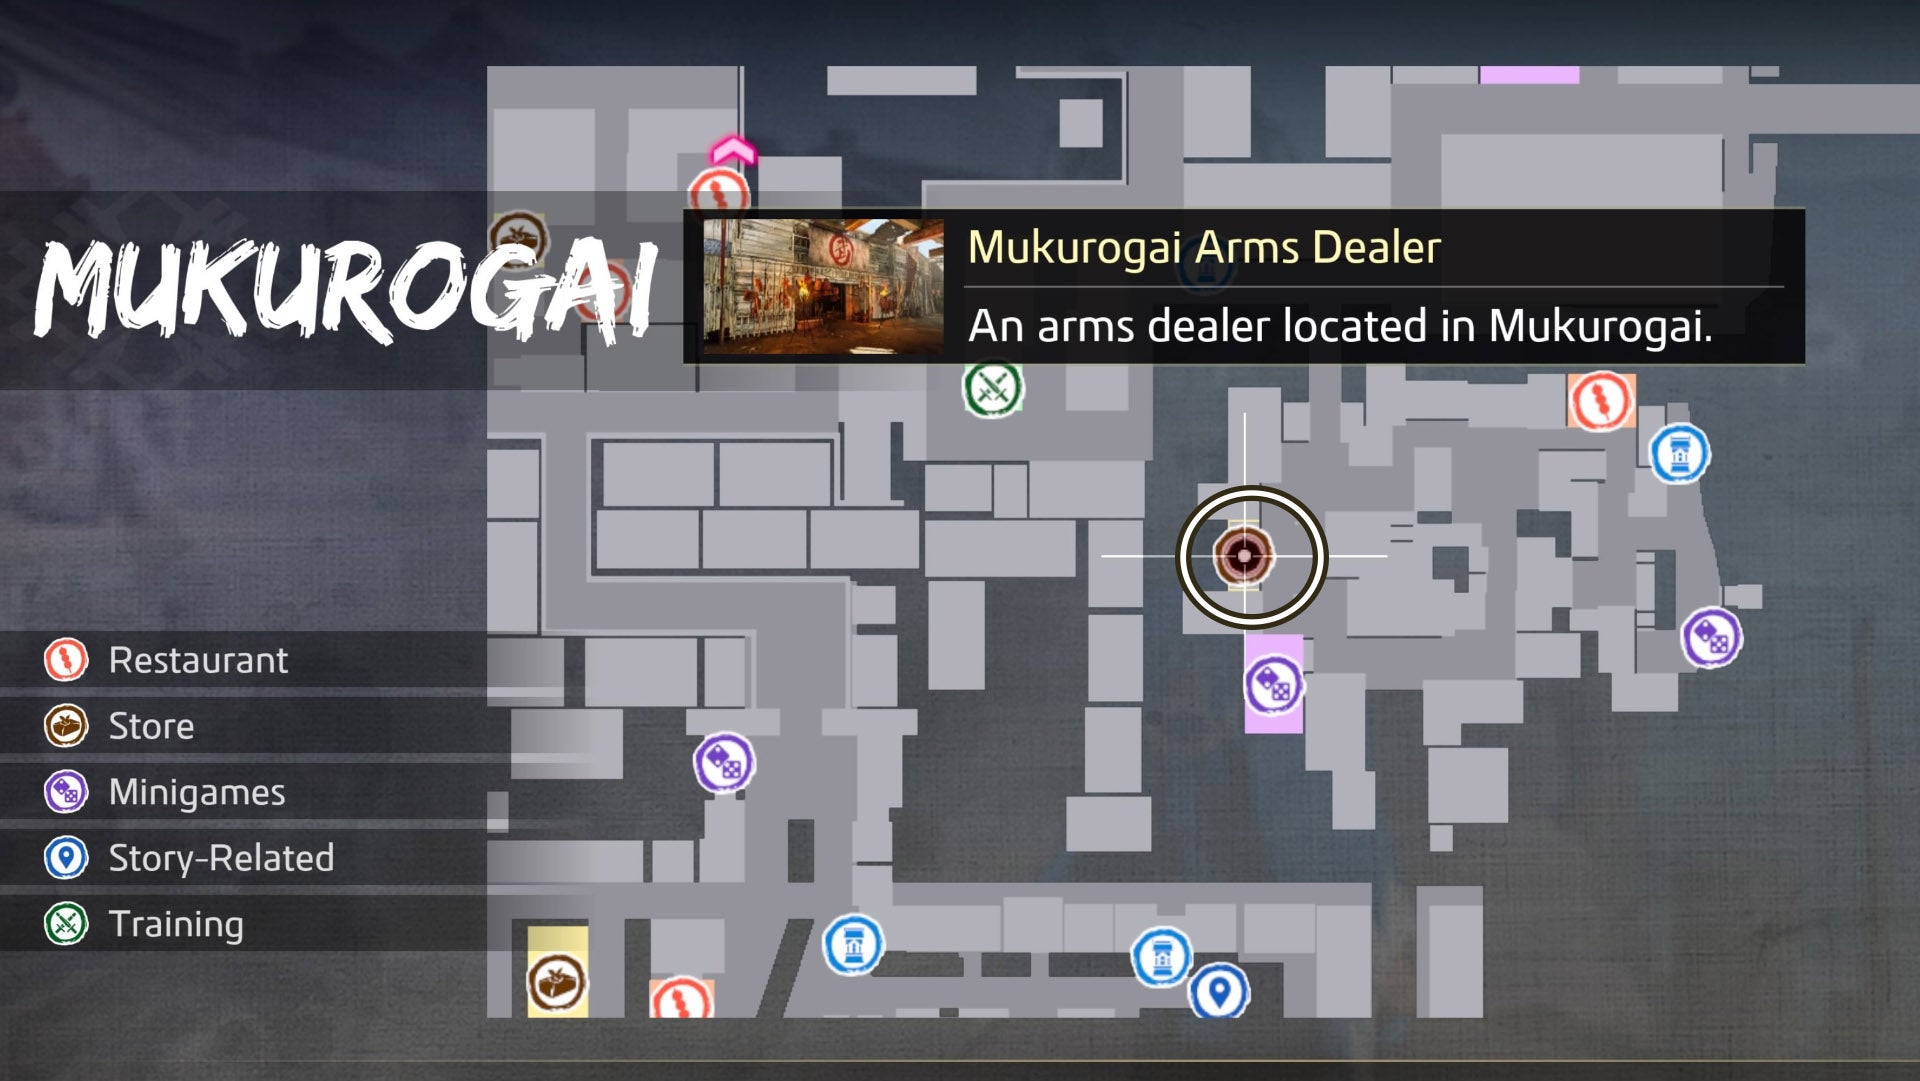 Like an Ishin dragon, the location of Mukurogai's arms dealer has been circled on the map.